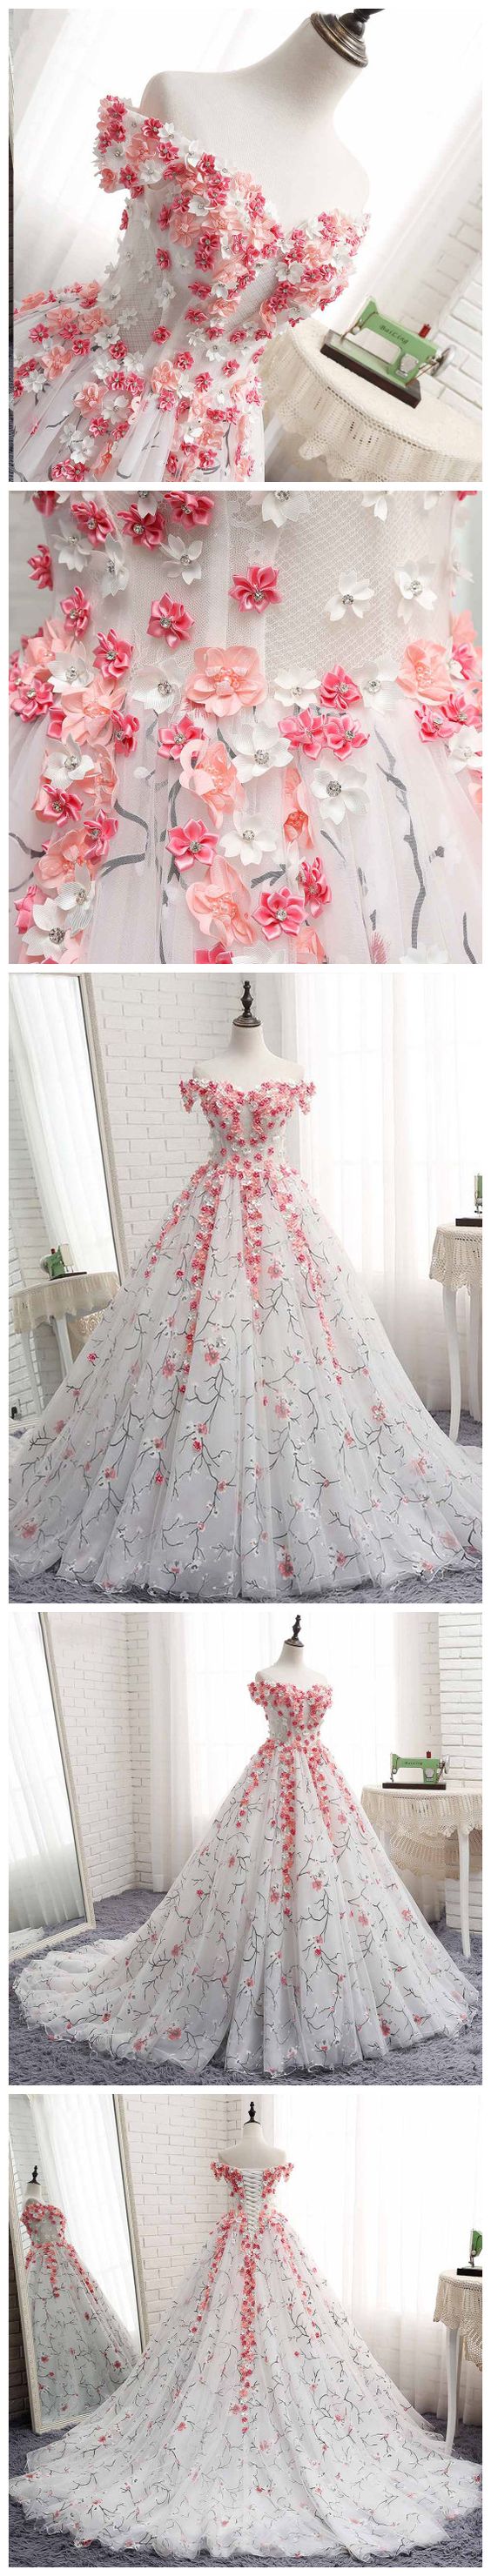 Ball Gowns Off-the-shoulder Prom Dresses With Applique Evening Gowns Long Prom Dresses Evening Dresses